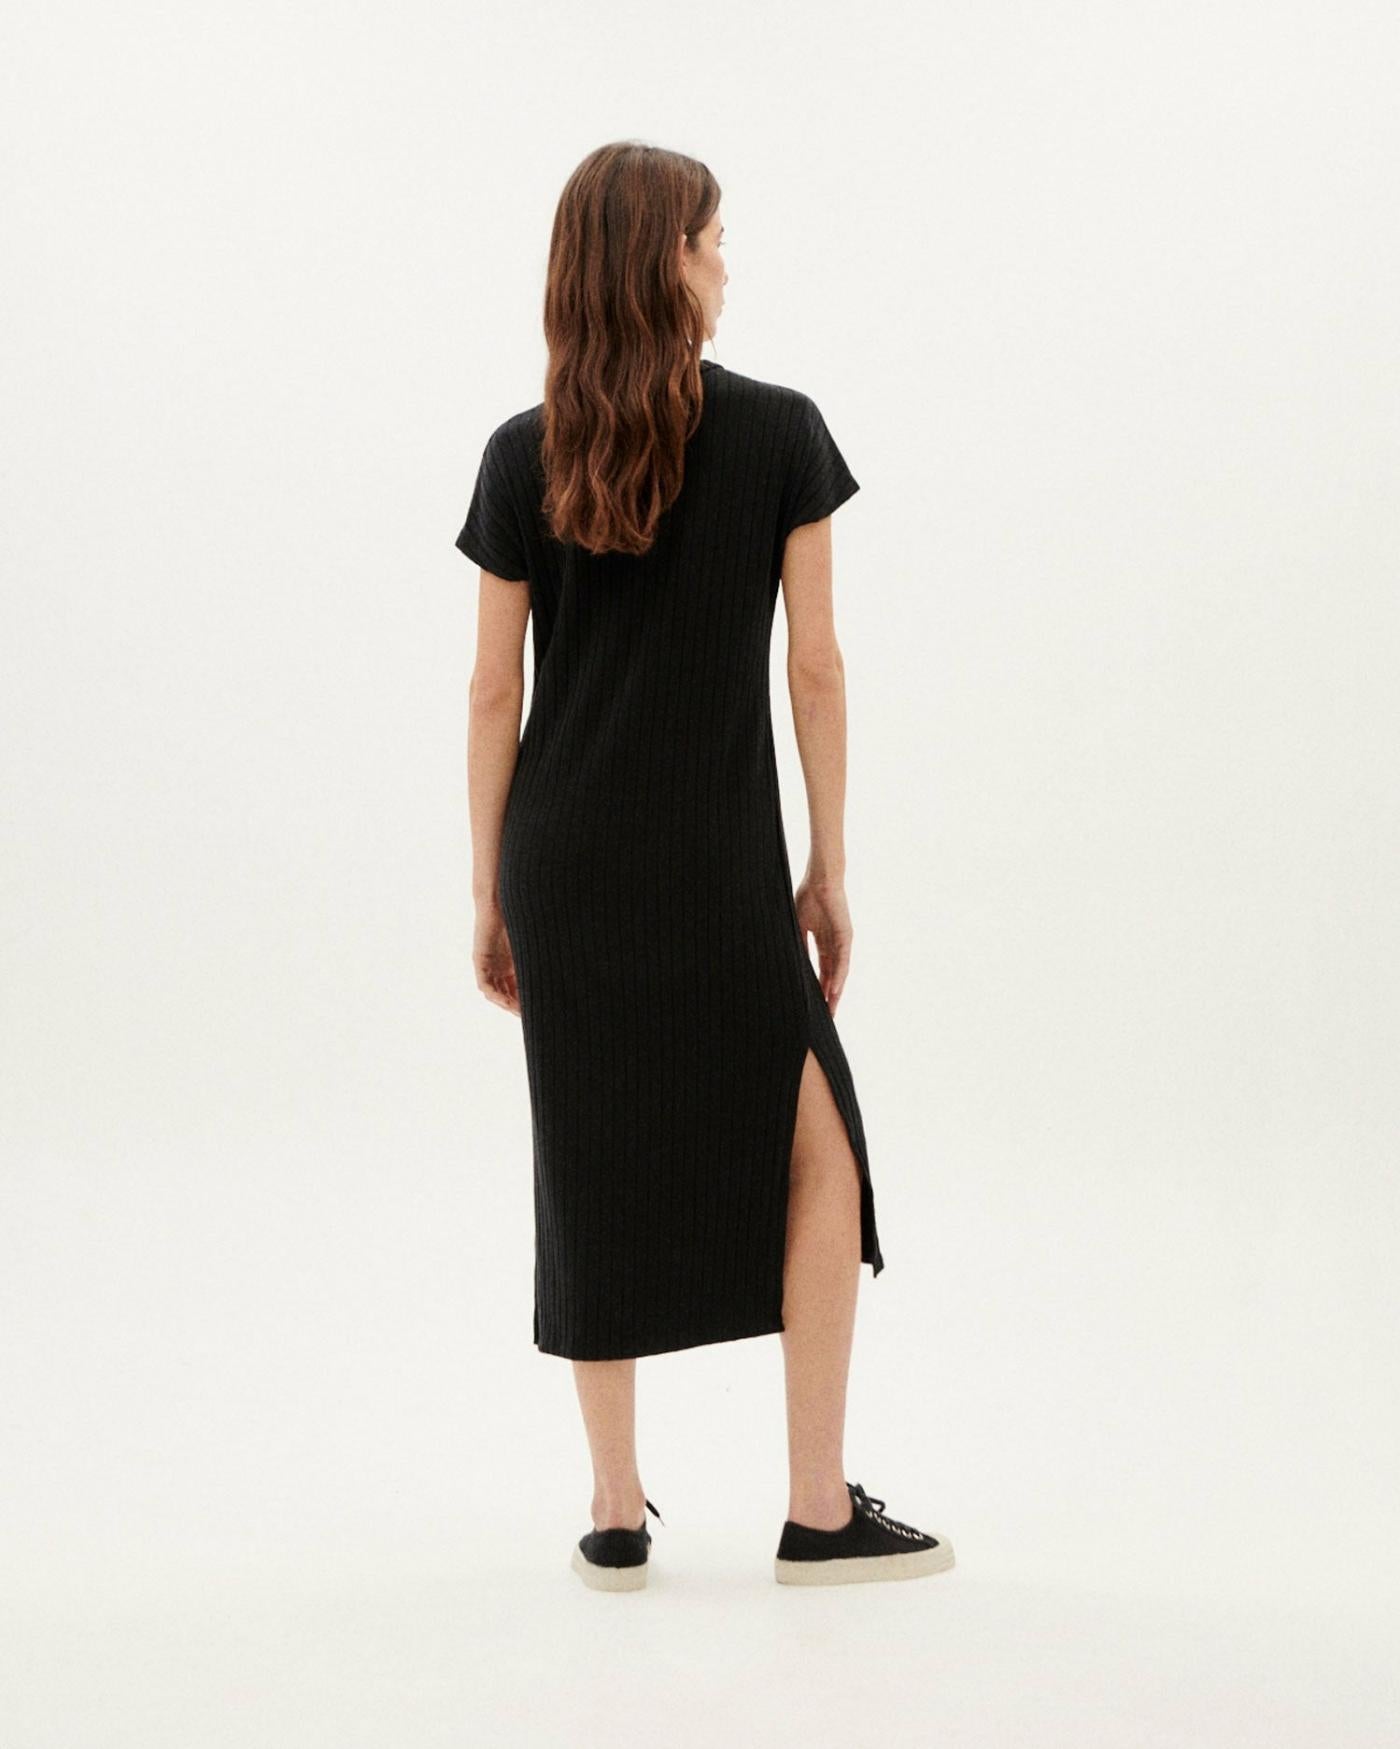 Thinking Mu Black Trash Cherry dress. Ribbed midi-length dress with a straight cut, round neck and short draped sleeves and side slits at the hem. Ethically made in India.